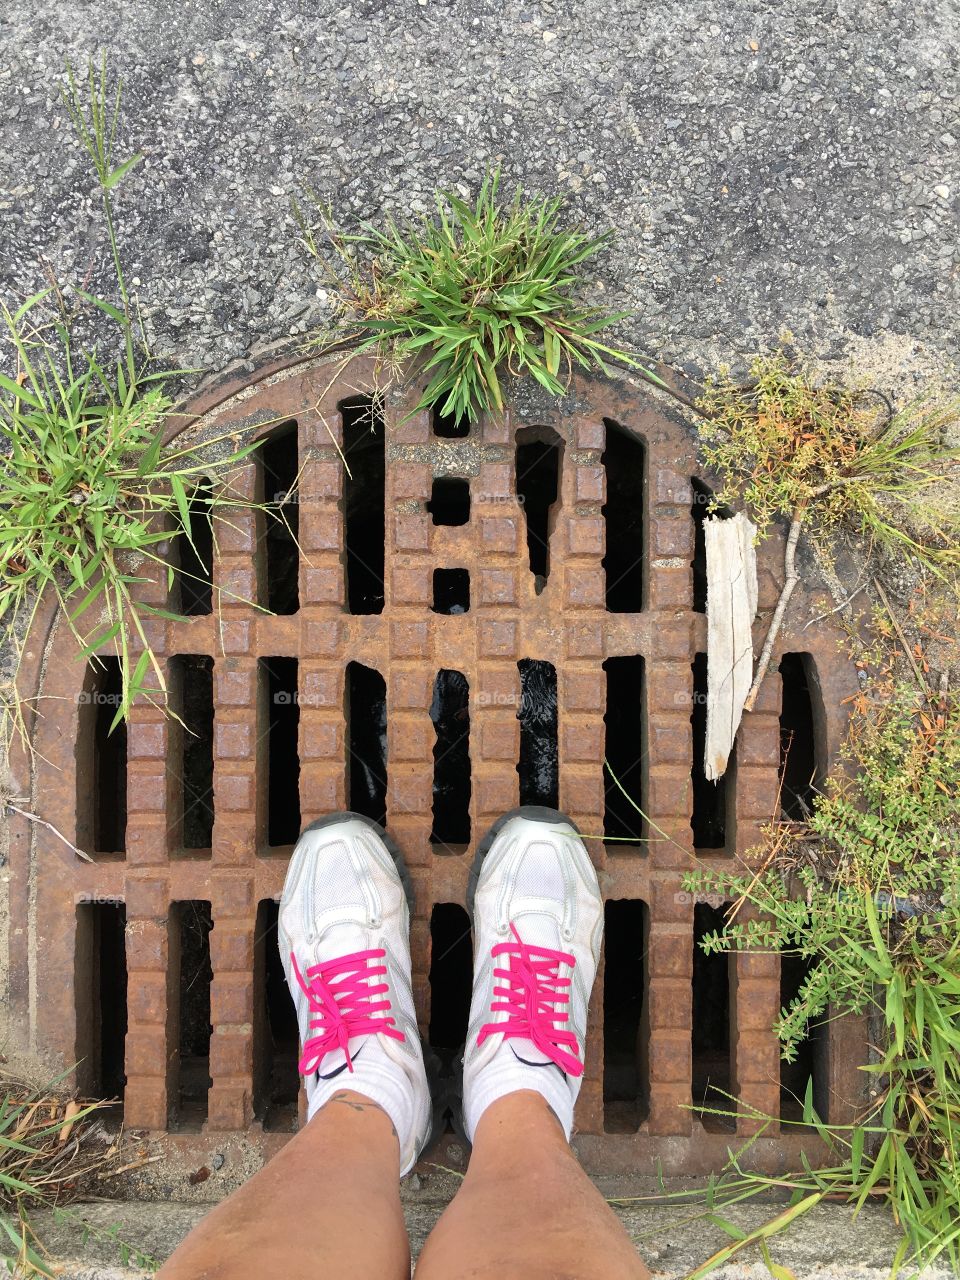 Standing on drainage grate before crossing street.